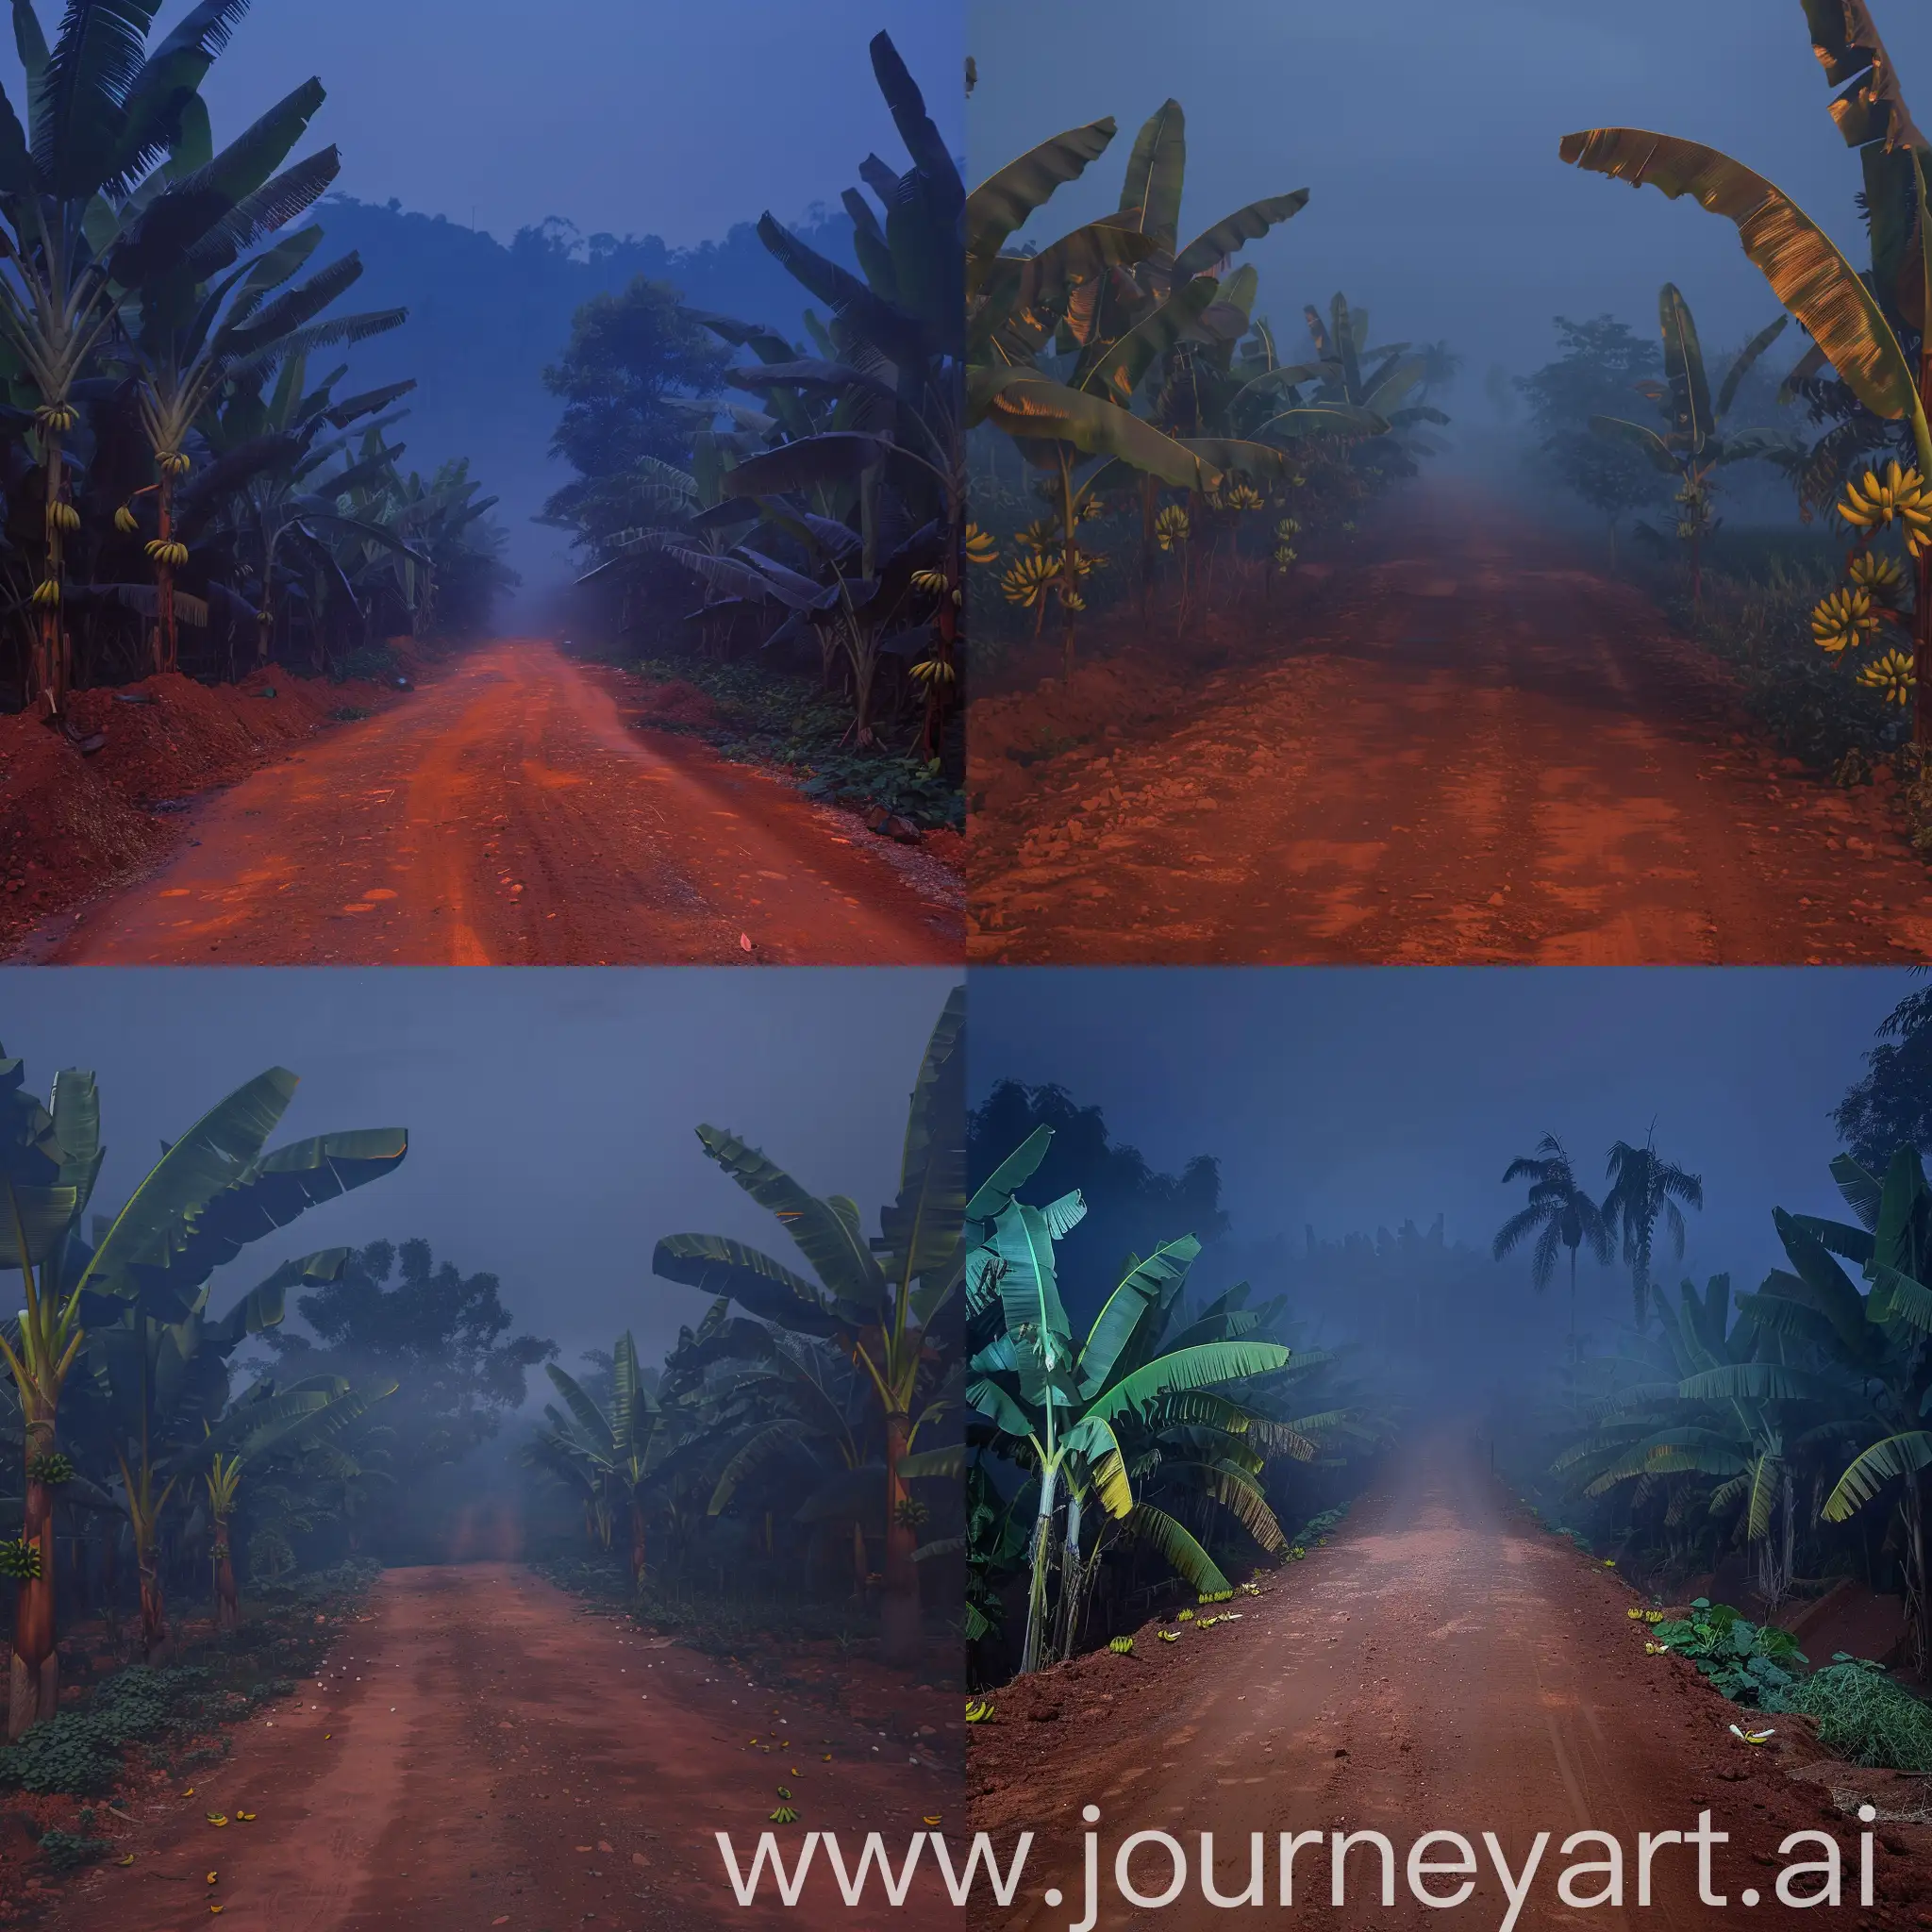 Foggy-Red-Soil-Village-Road-with-Banana-Trees-at-Night